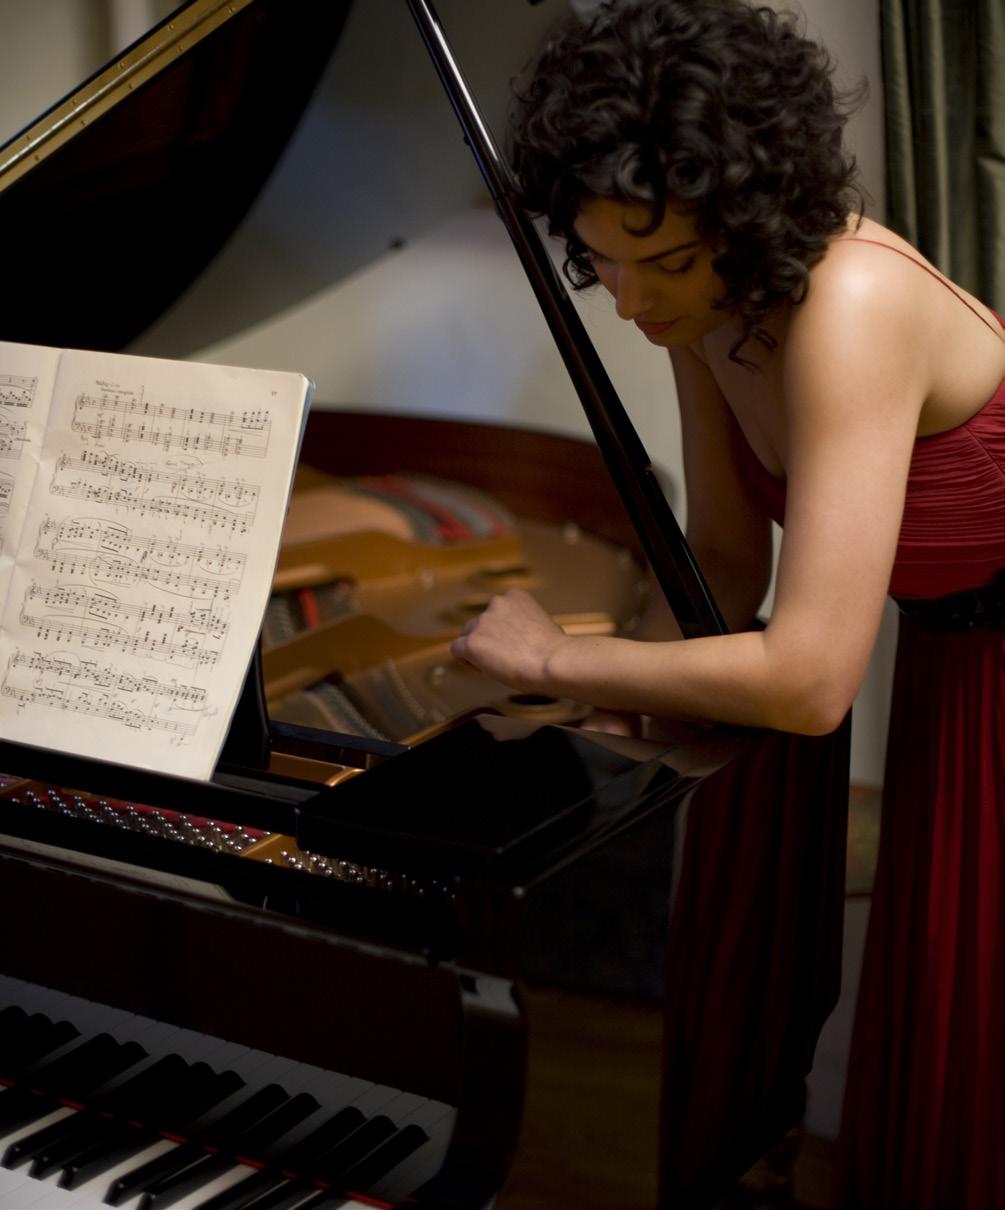 PRESS Concert Review: Neumann livens up Bach The Sacramento Bee By Edward Ortiz Published: Monday, Mar. 15, 2010 Page 5D AN OBSERVATION often made about the music of J.S. Bach is that it lacks a certain contrast and drama.